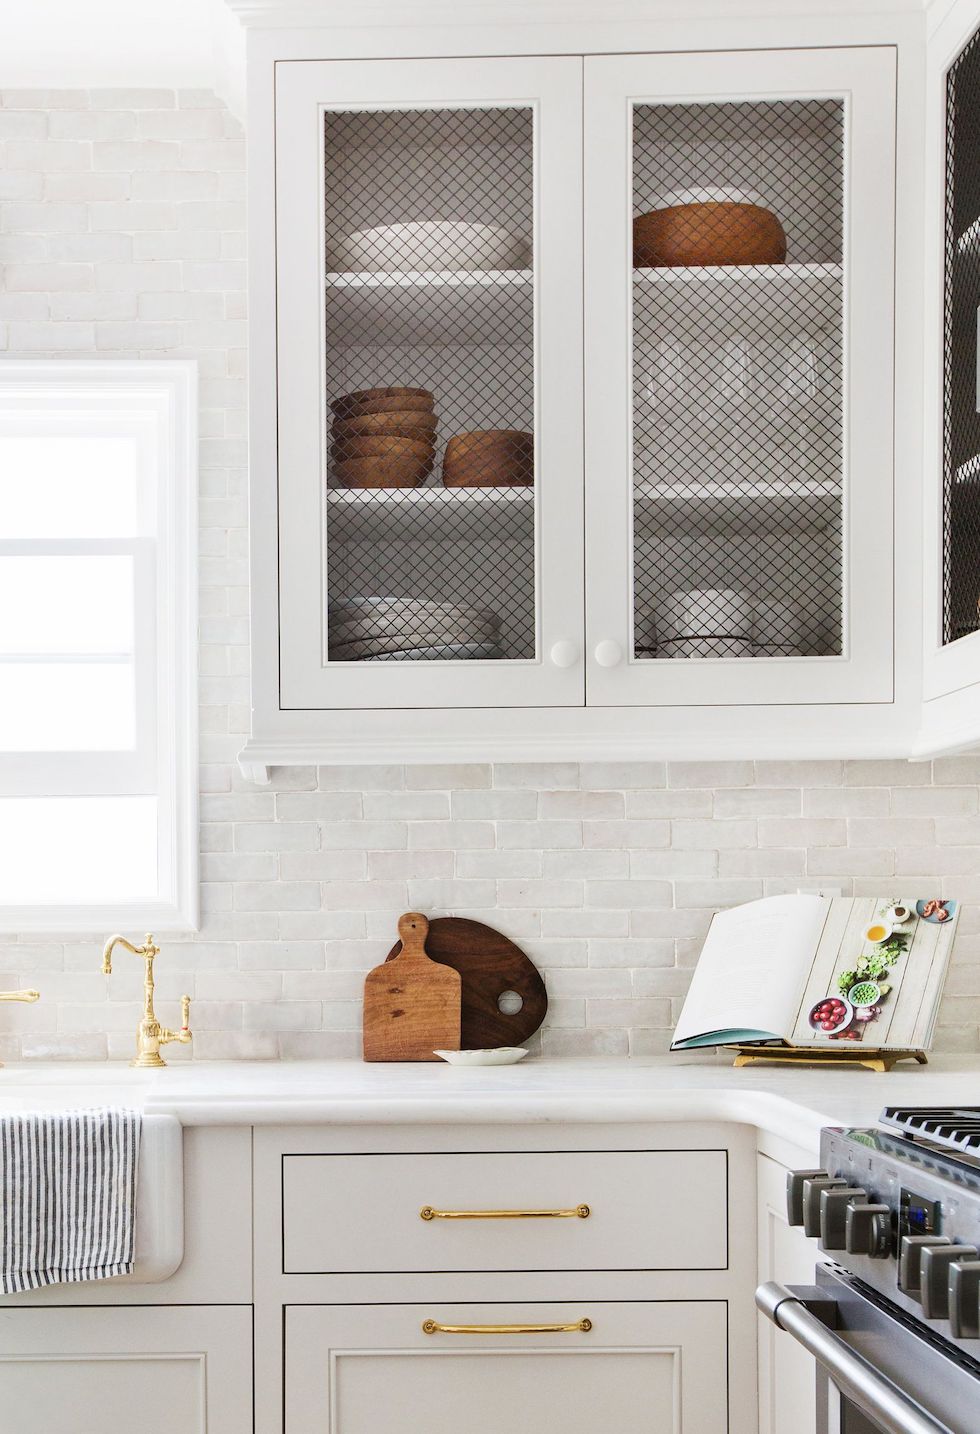 14 Ideas for a Cozy Fall Kitchen